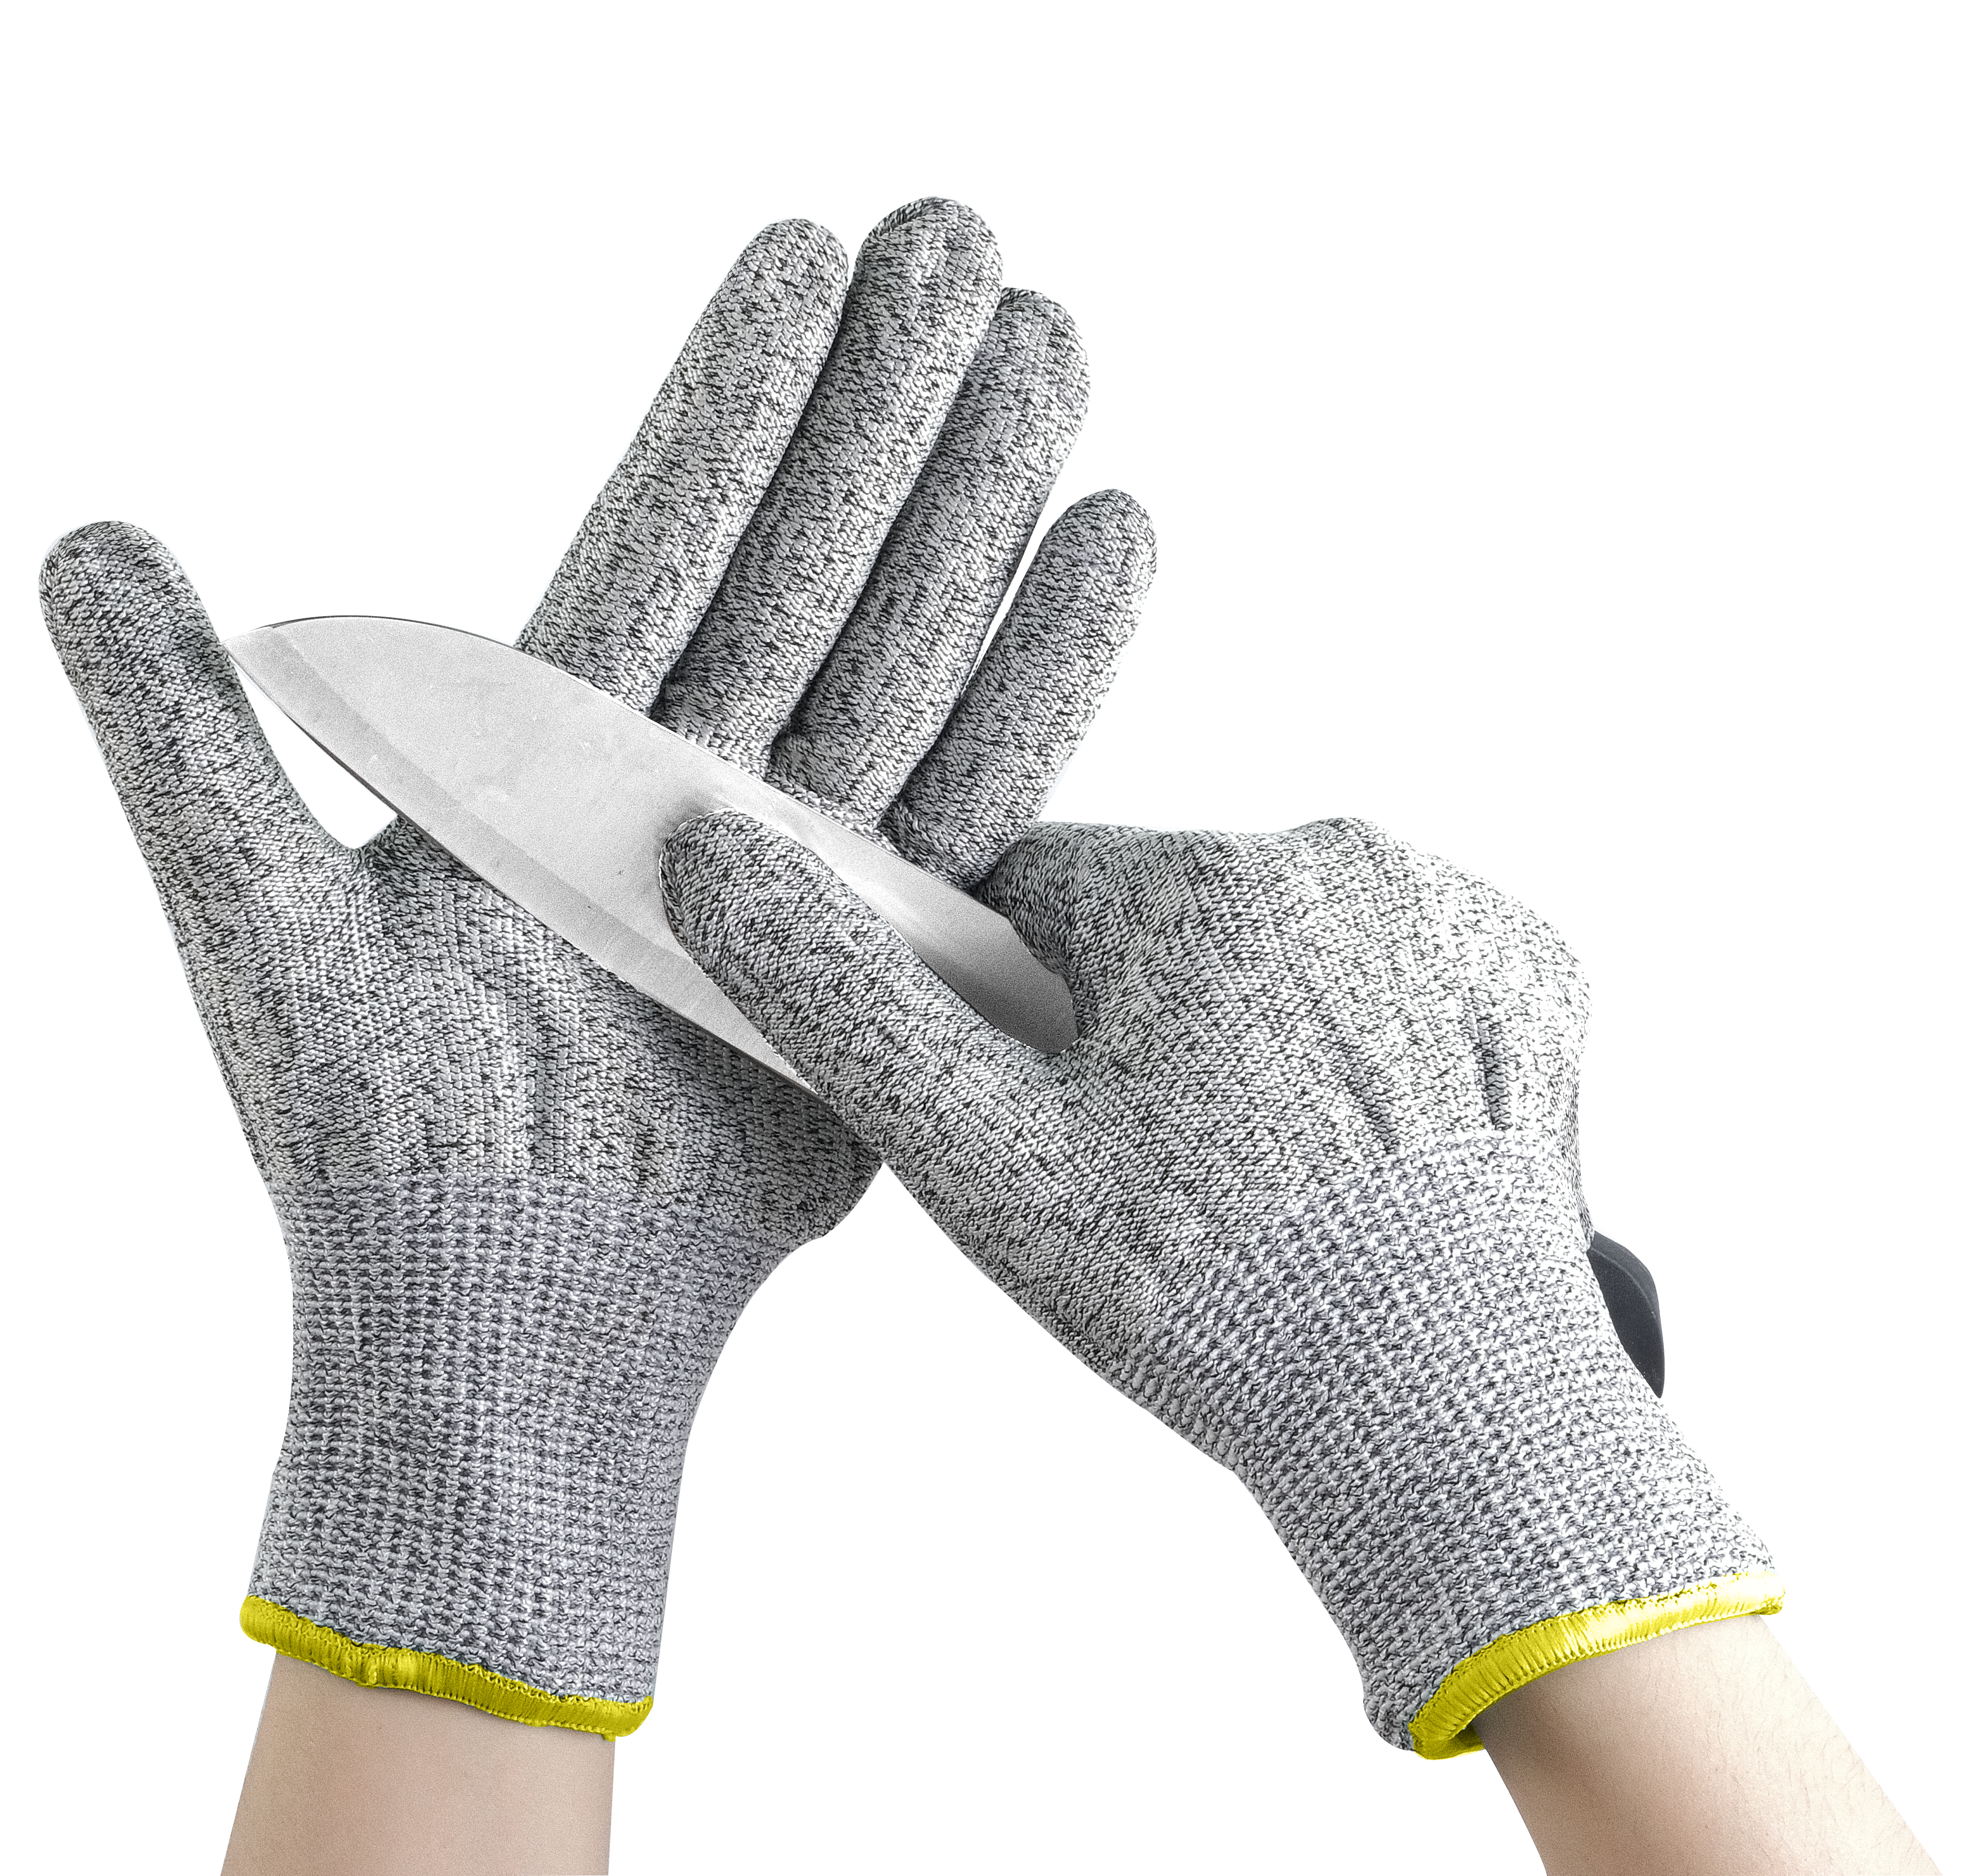 What Is The Market Price of Cut Resistant Gloves Without Coating